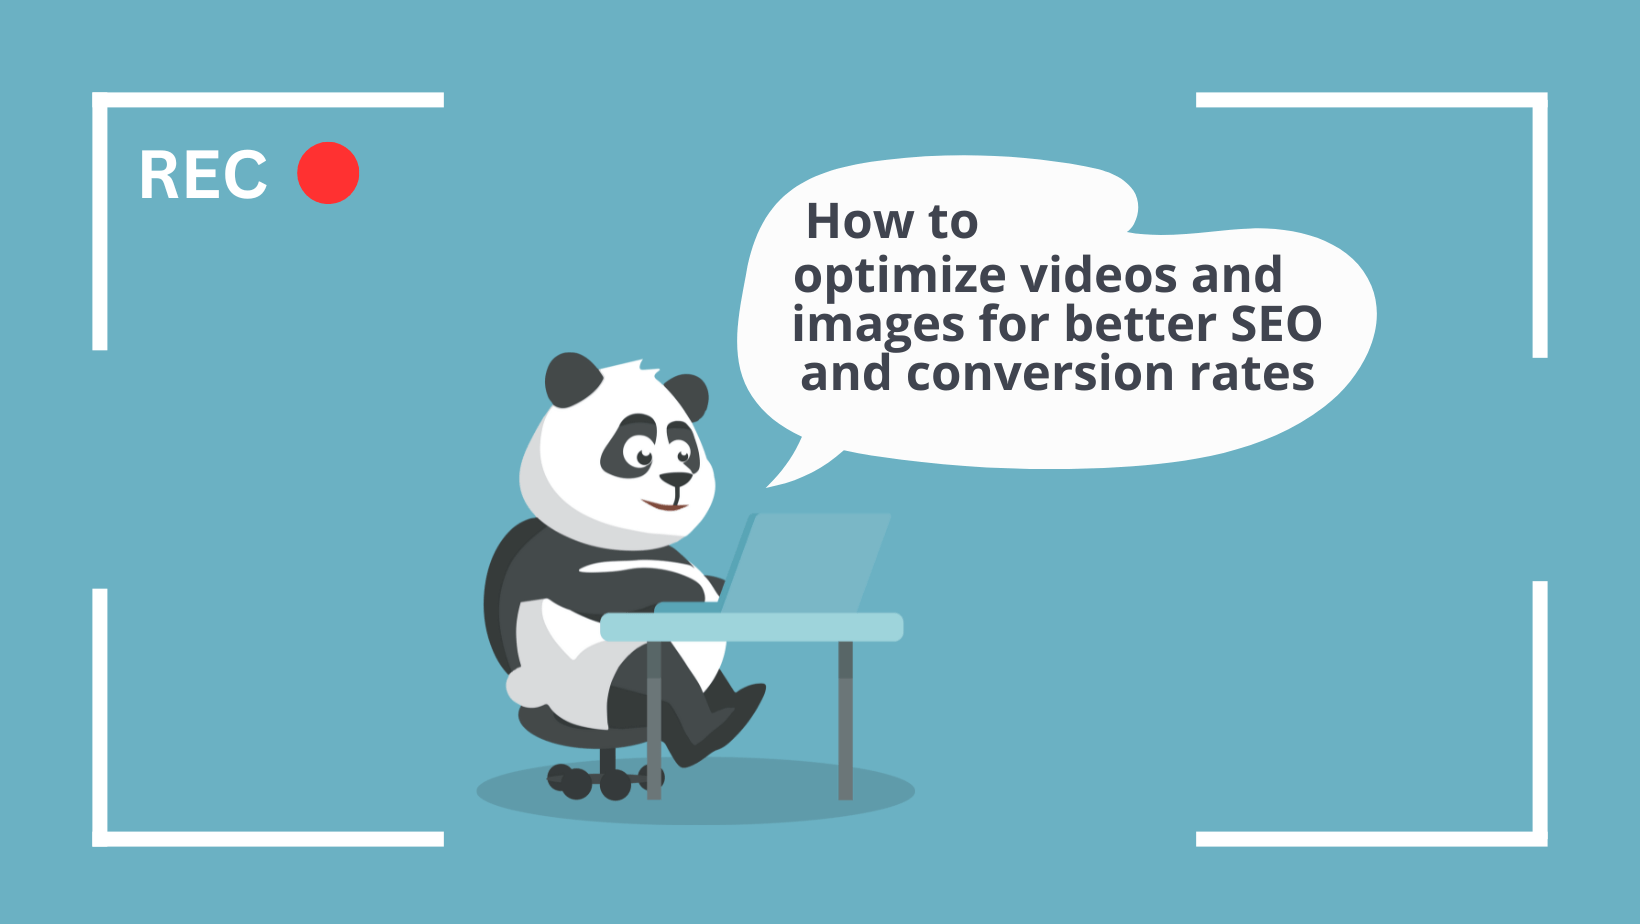 How to optimize videos and images for better SEO traffic and conversion rates